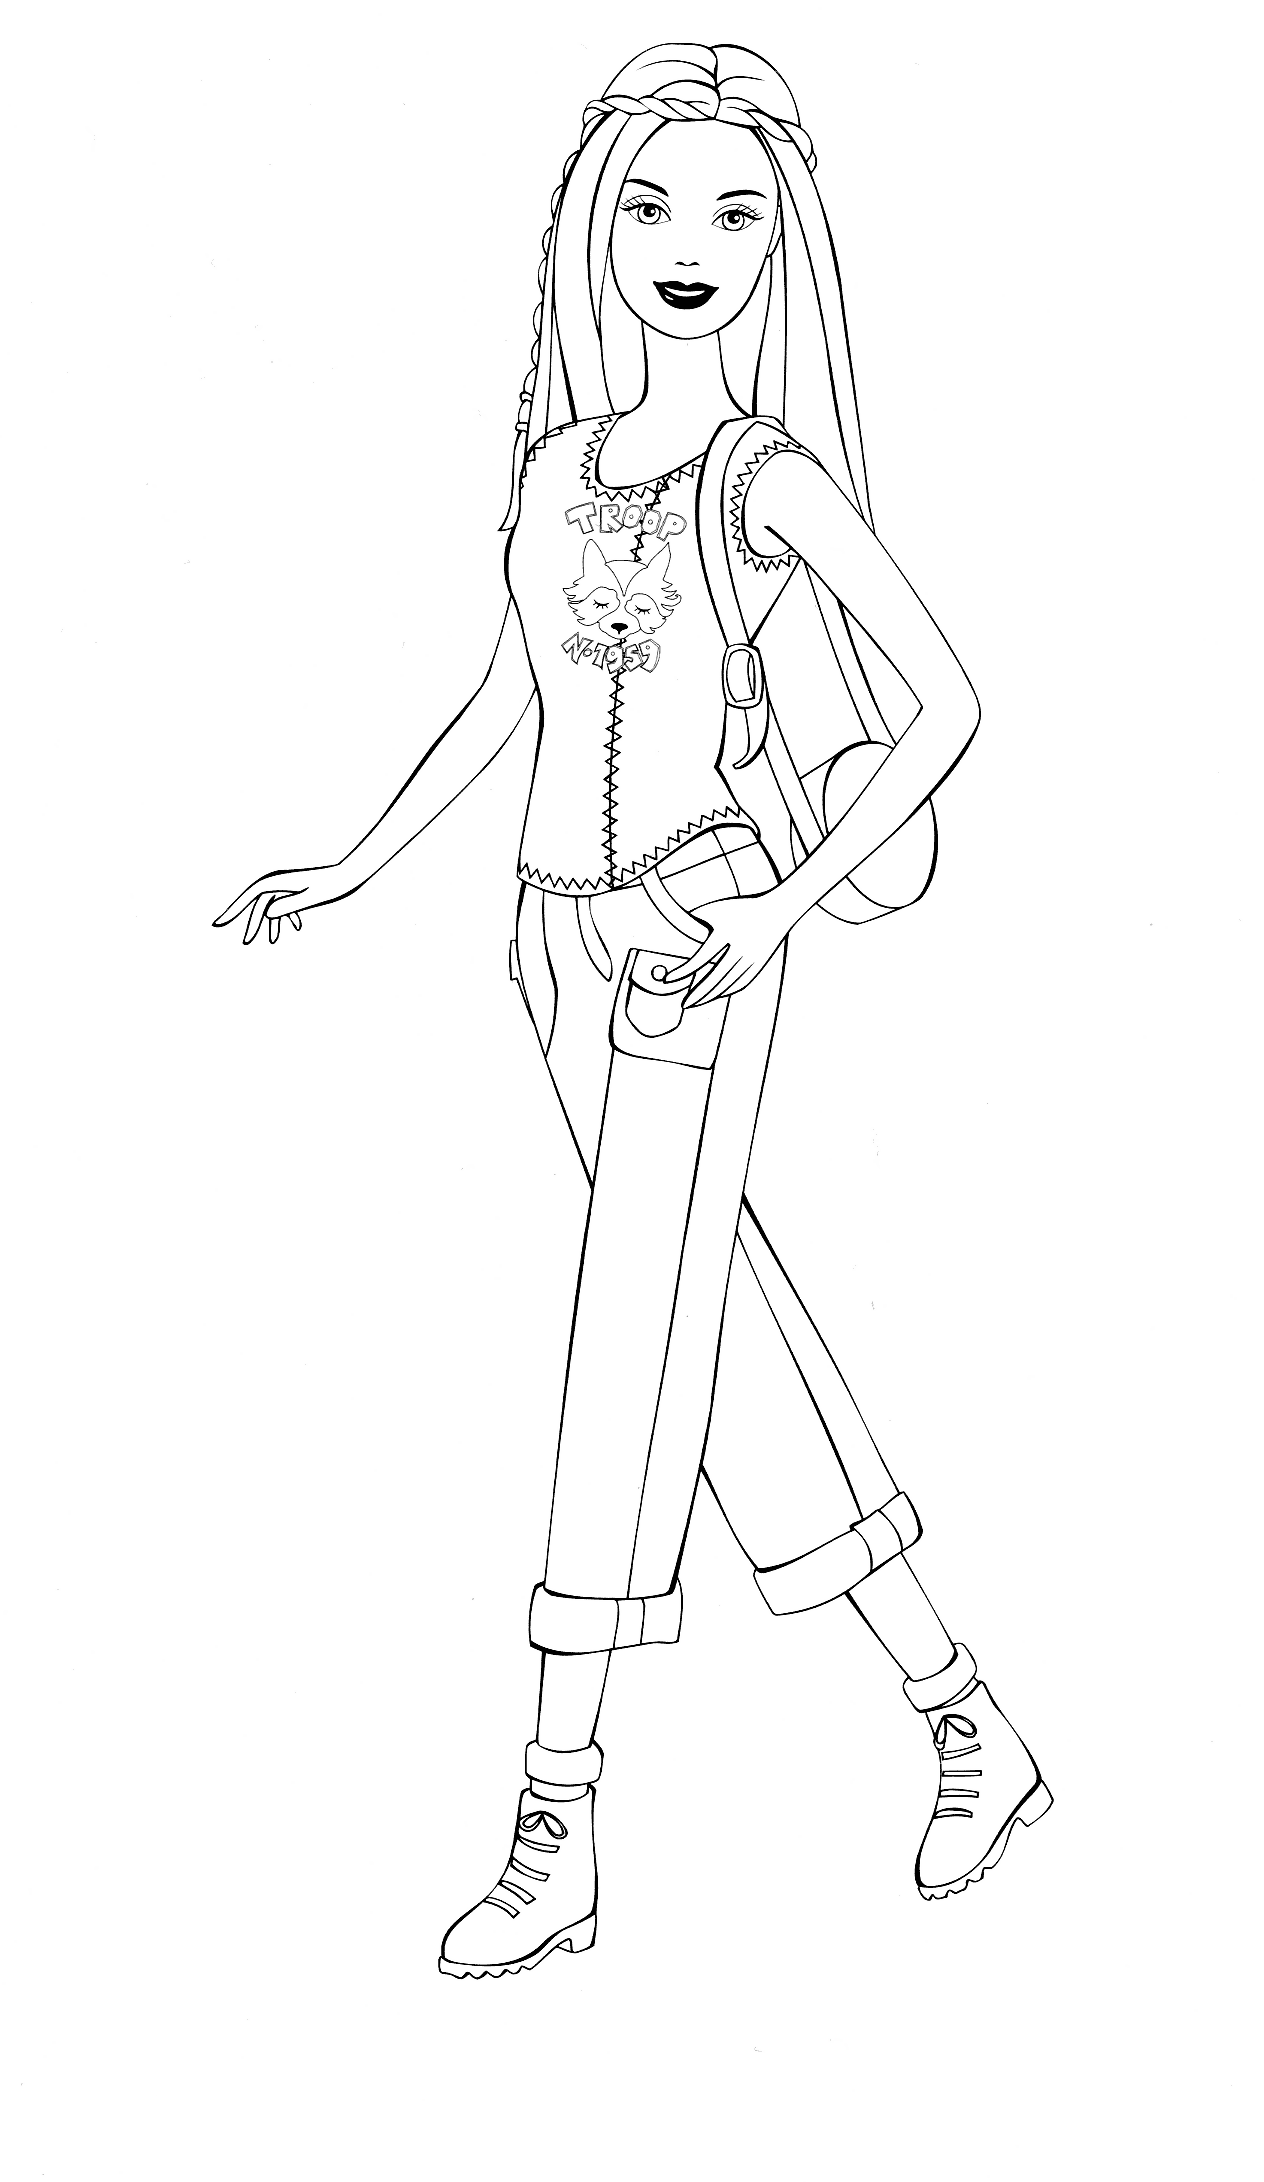 Coloring page - Barbie for a walk